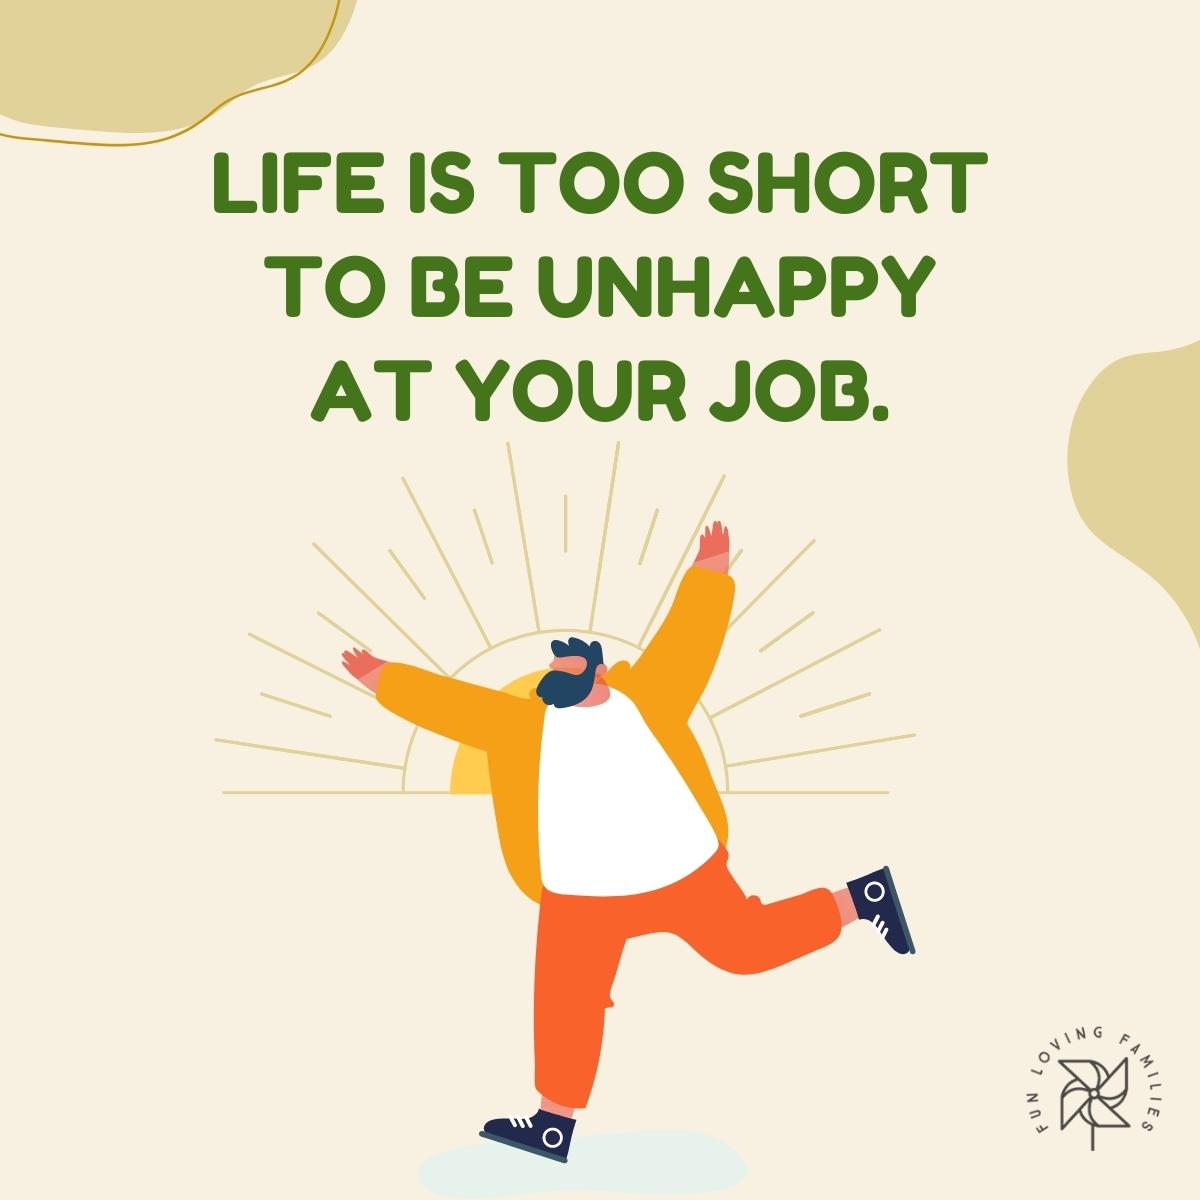 Life is too short to be unhappy at your job affirmation